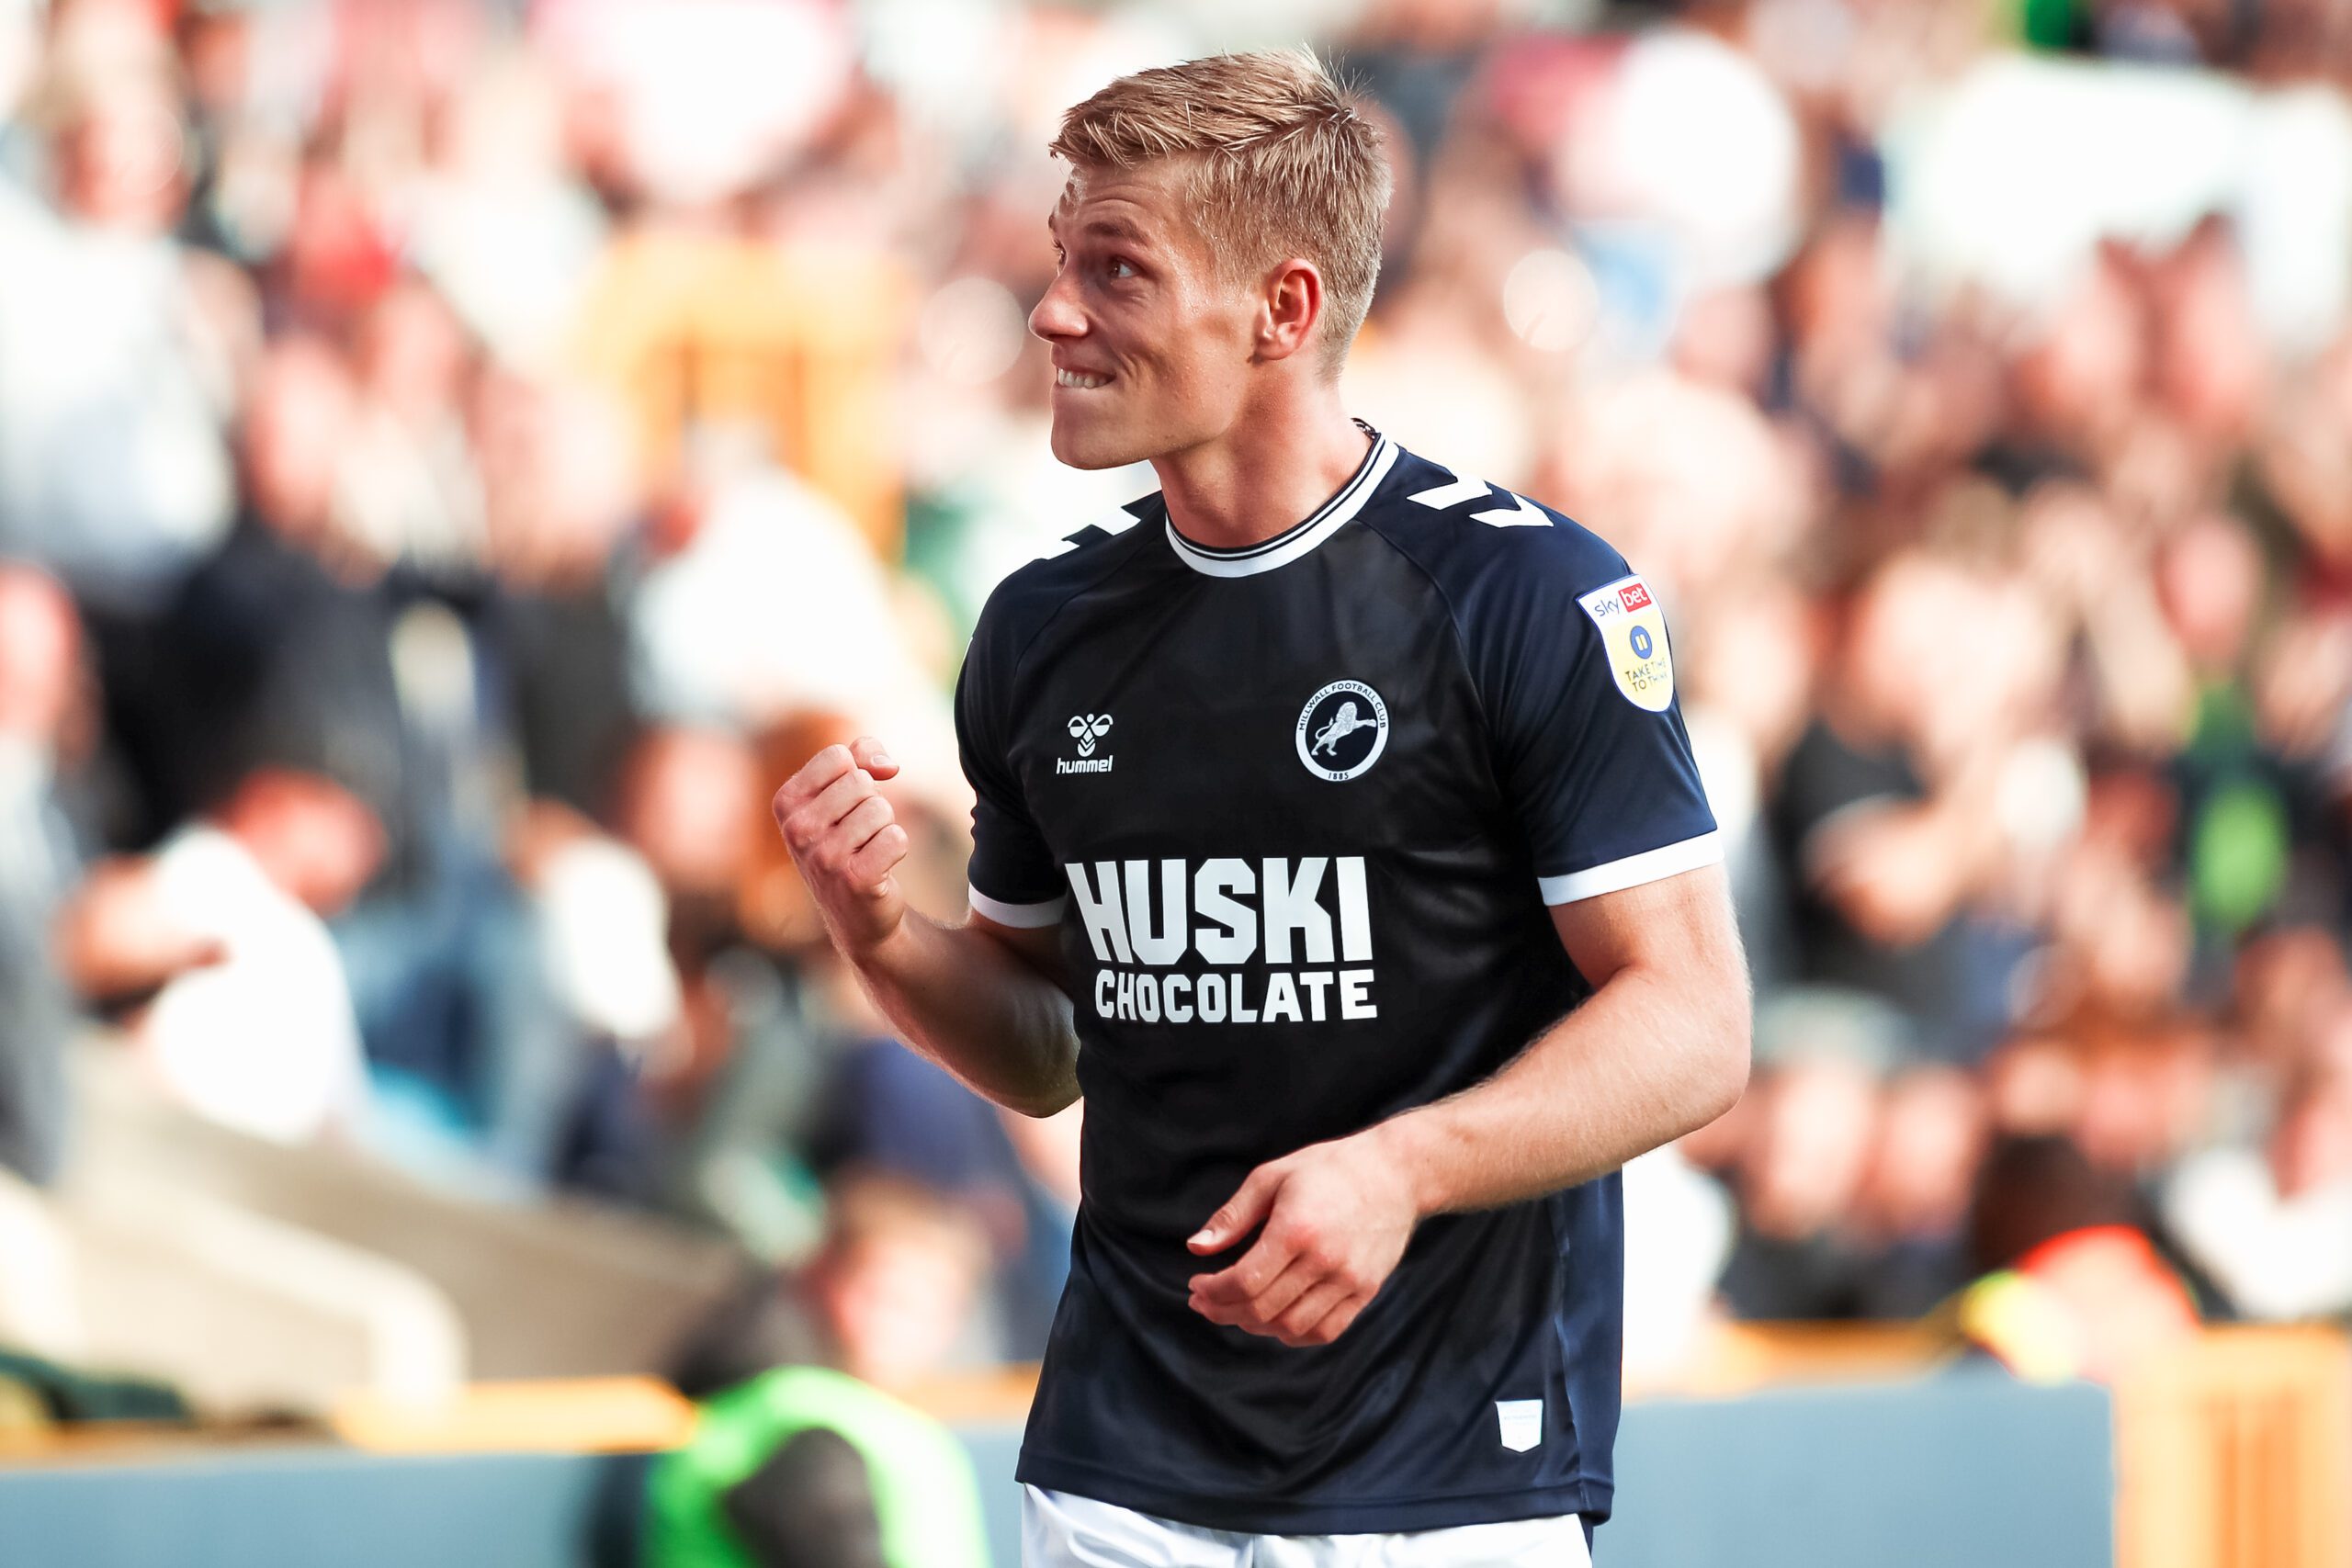 Millwall attacker set to leave club after bid accepted - Southwark News